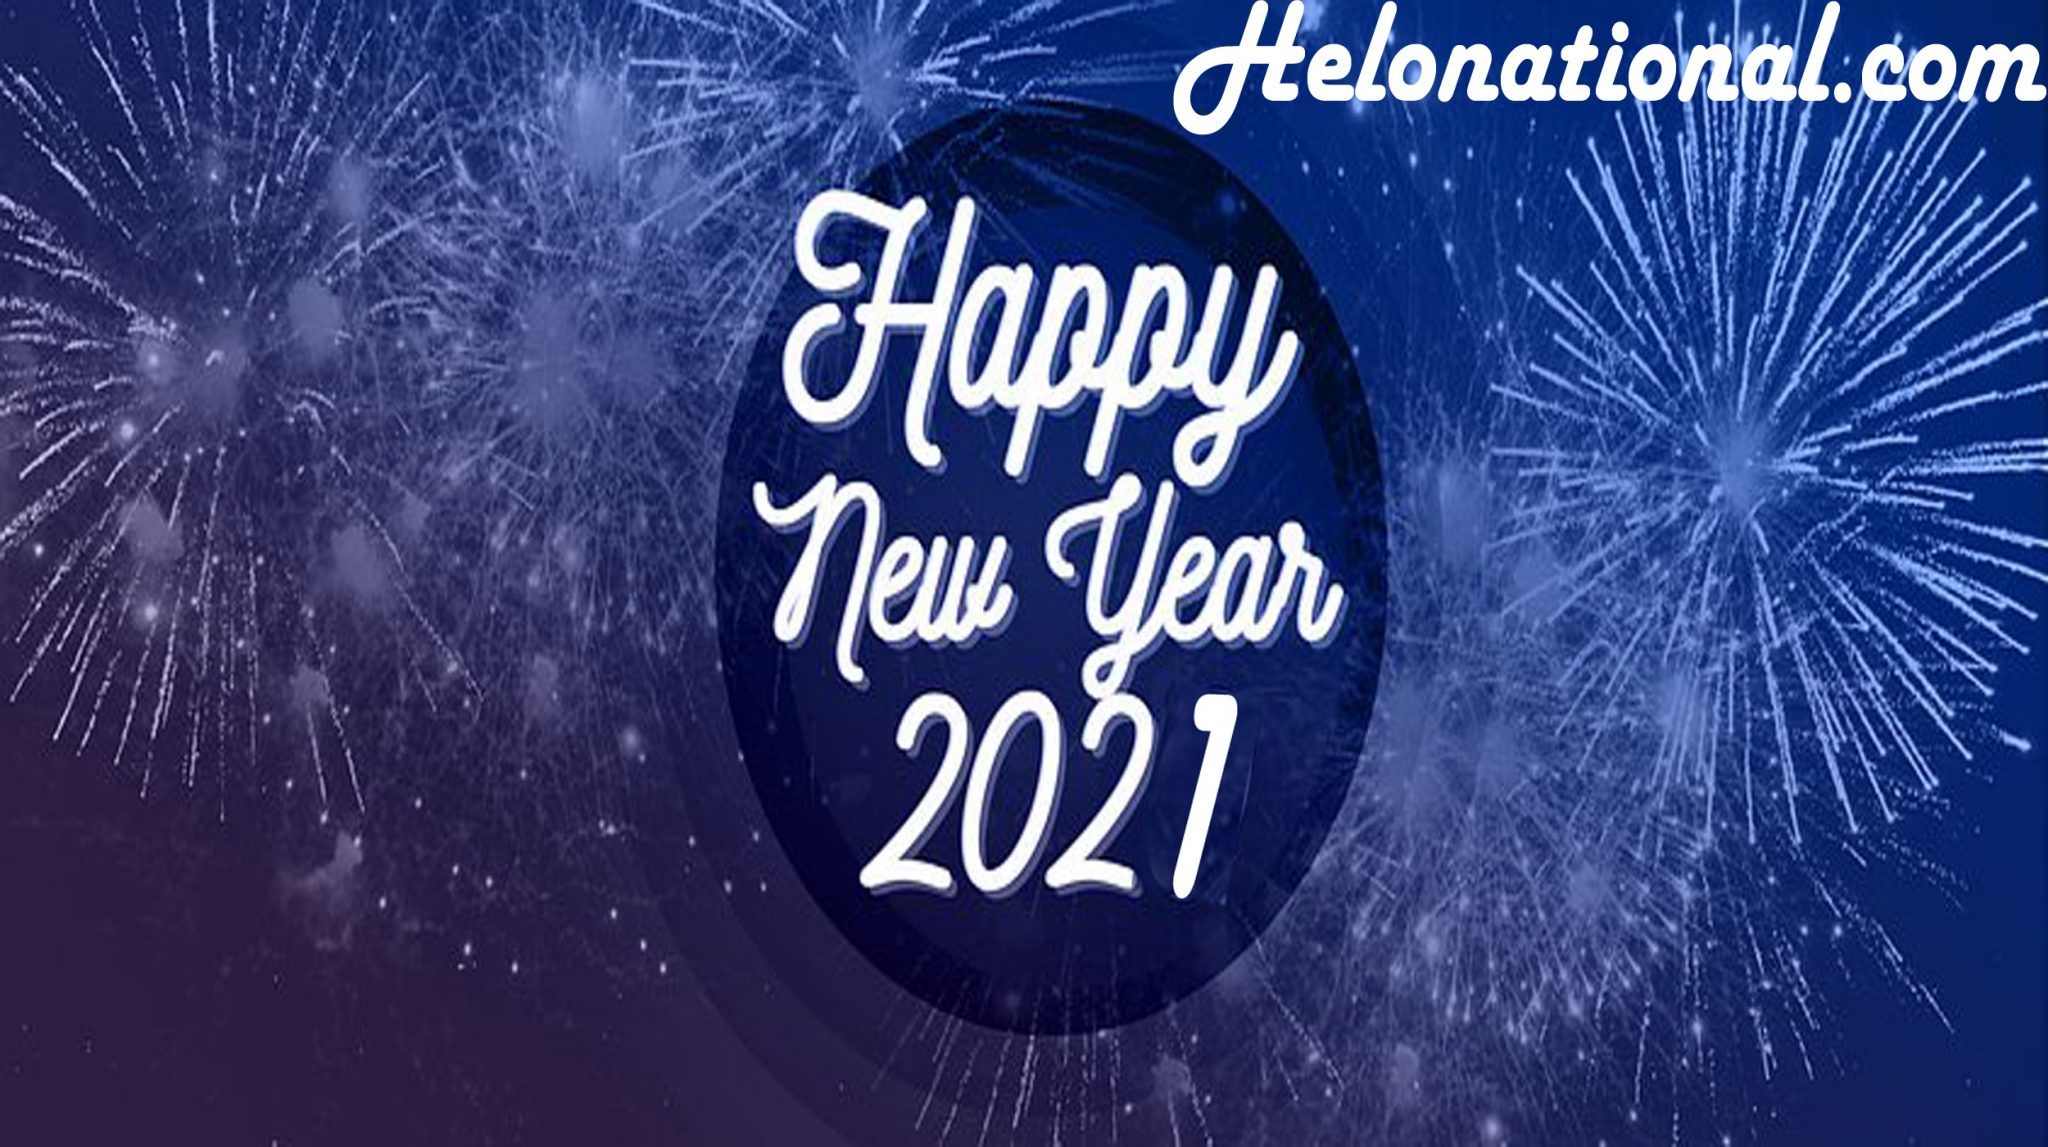 Happy New Year 2021: Image, Wishes, Quotes, Celebrations, Jokes, Cards, Wallpapers, Photos